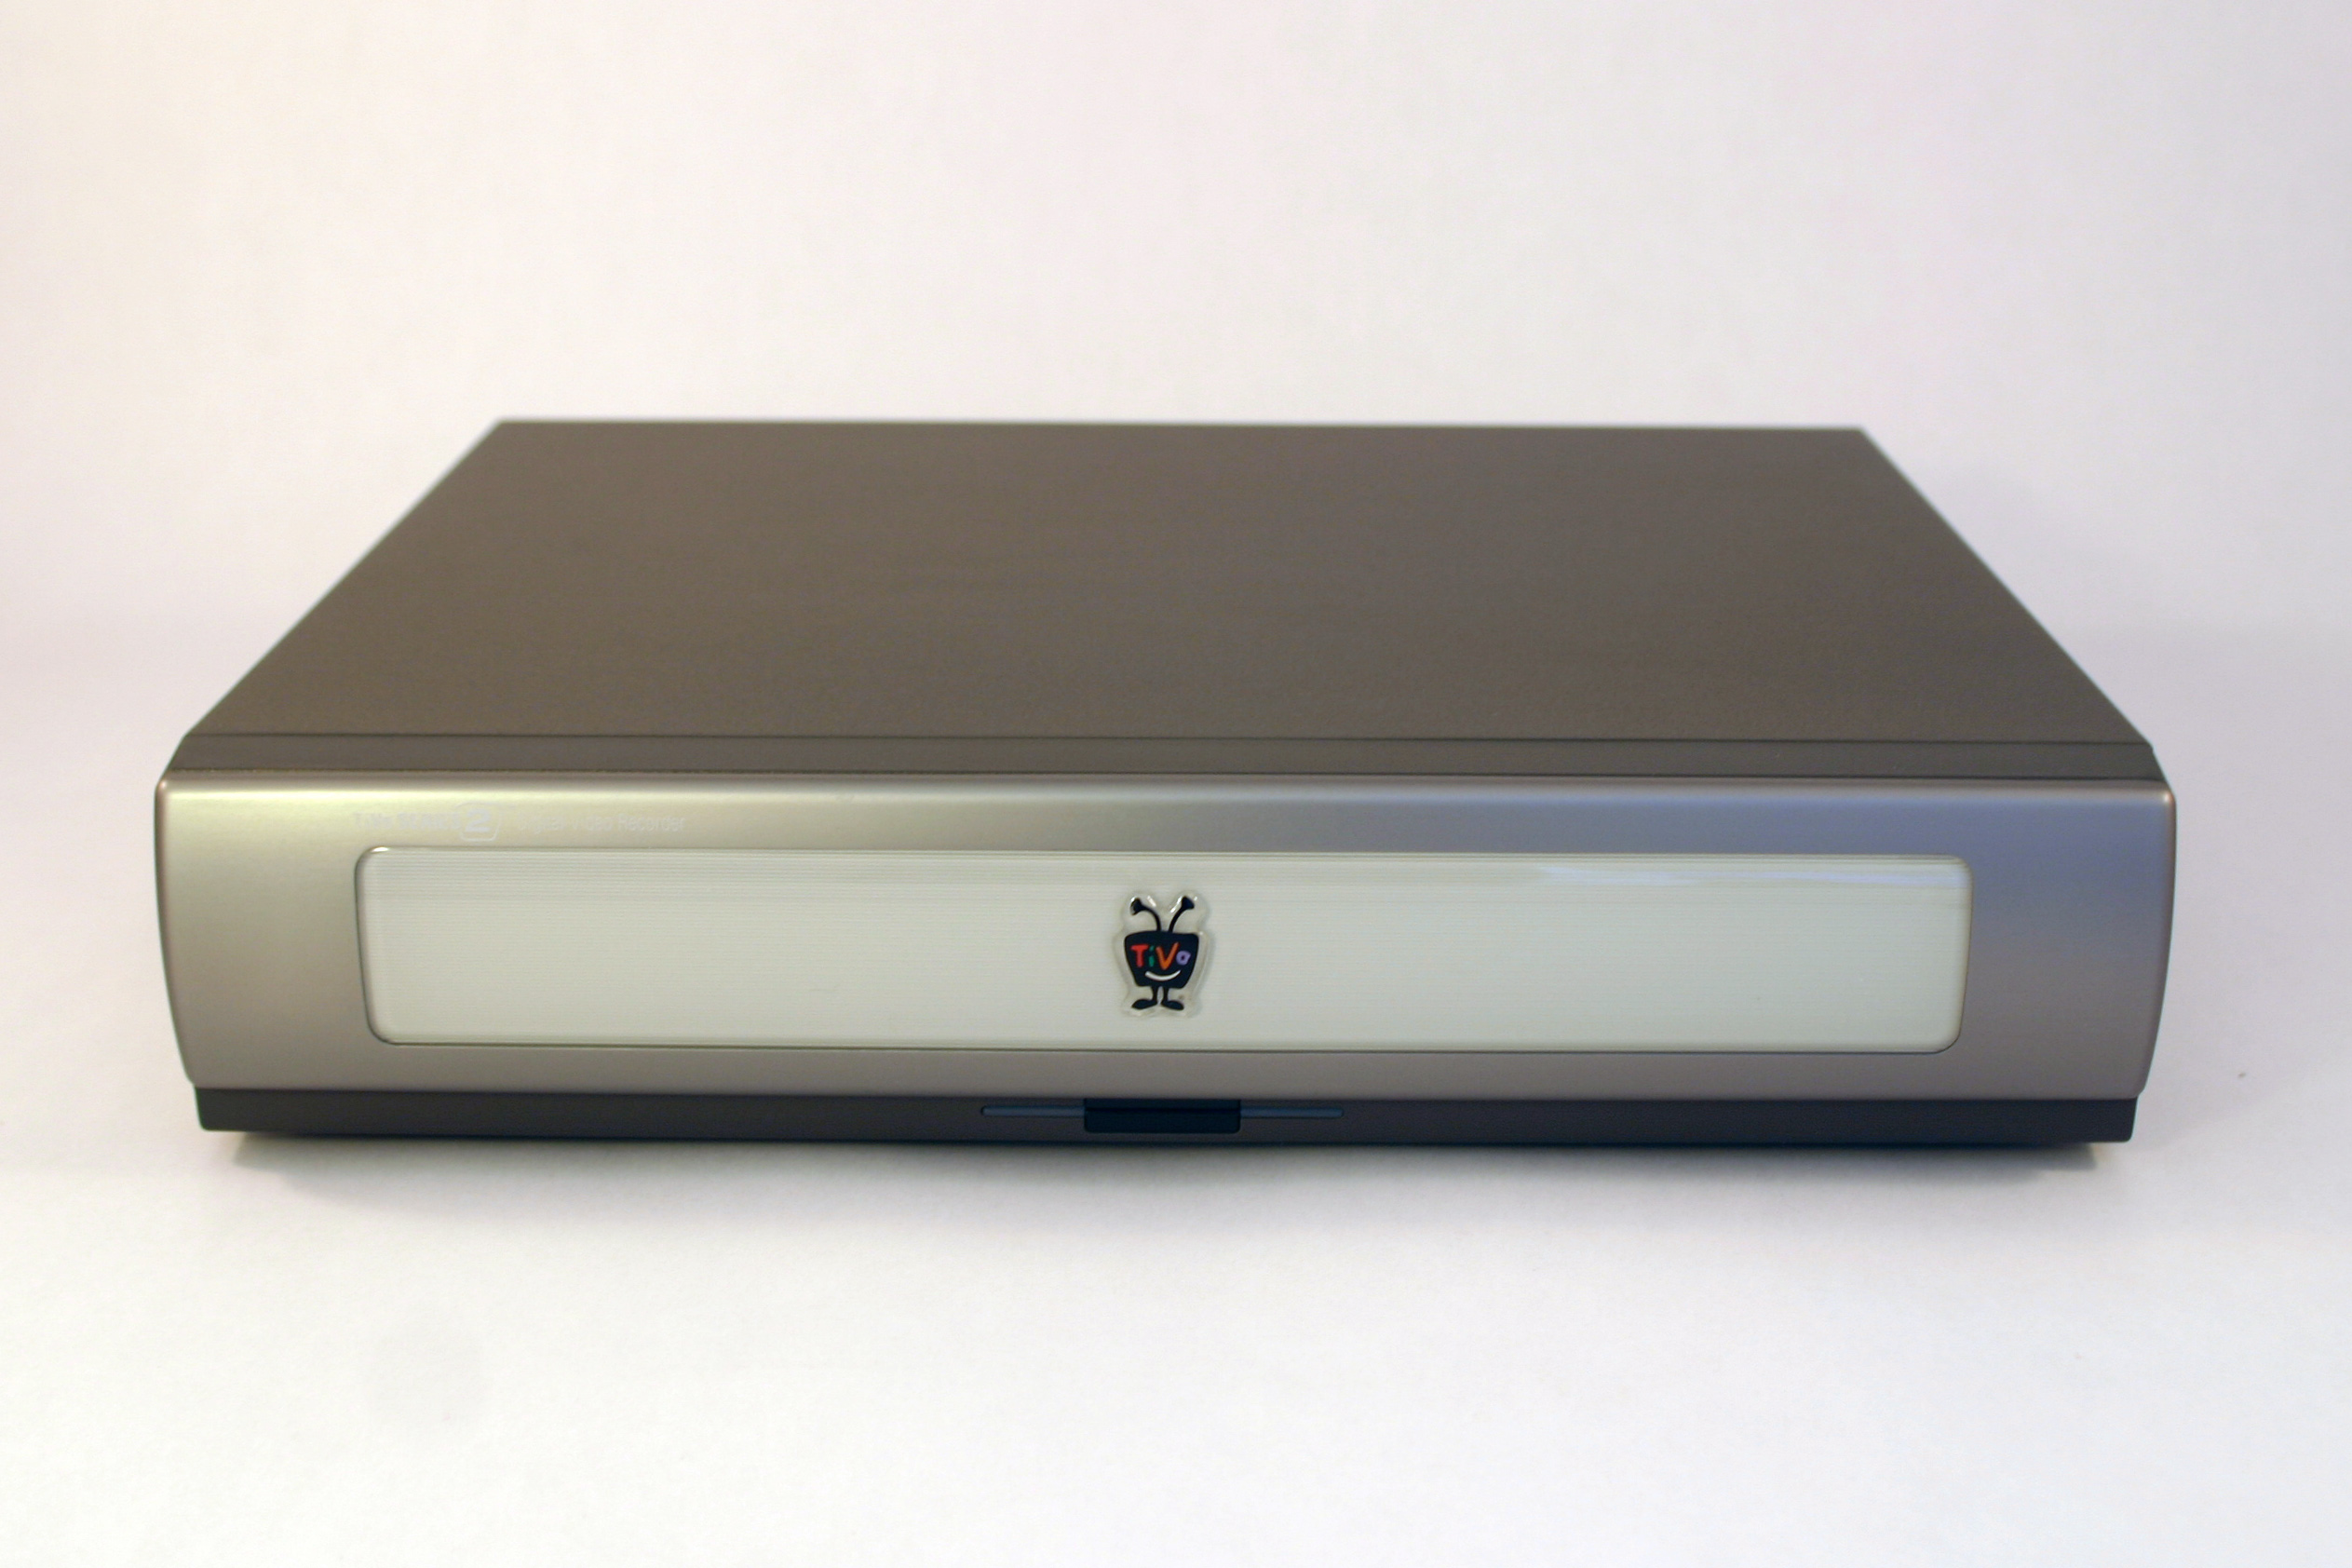 Series 2 tivo front